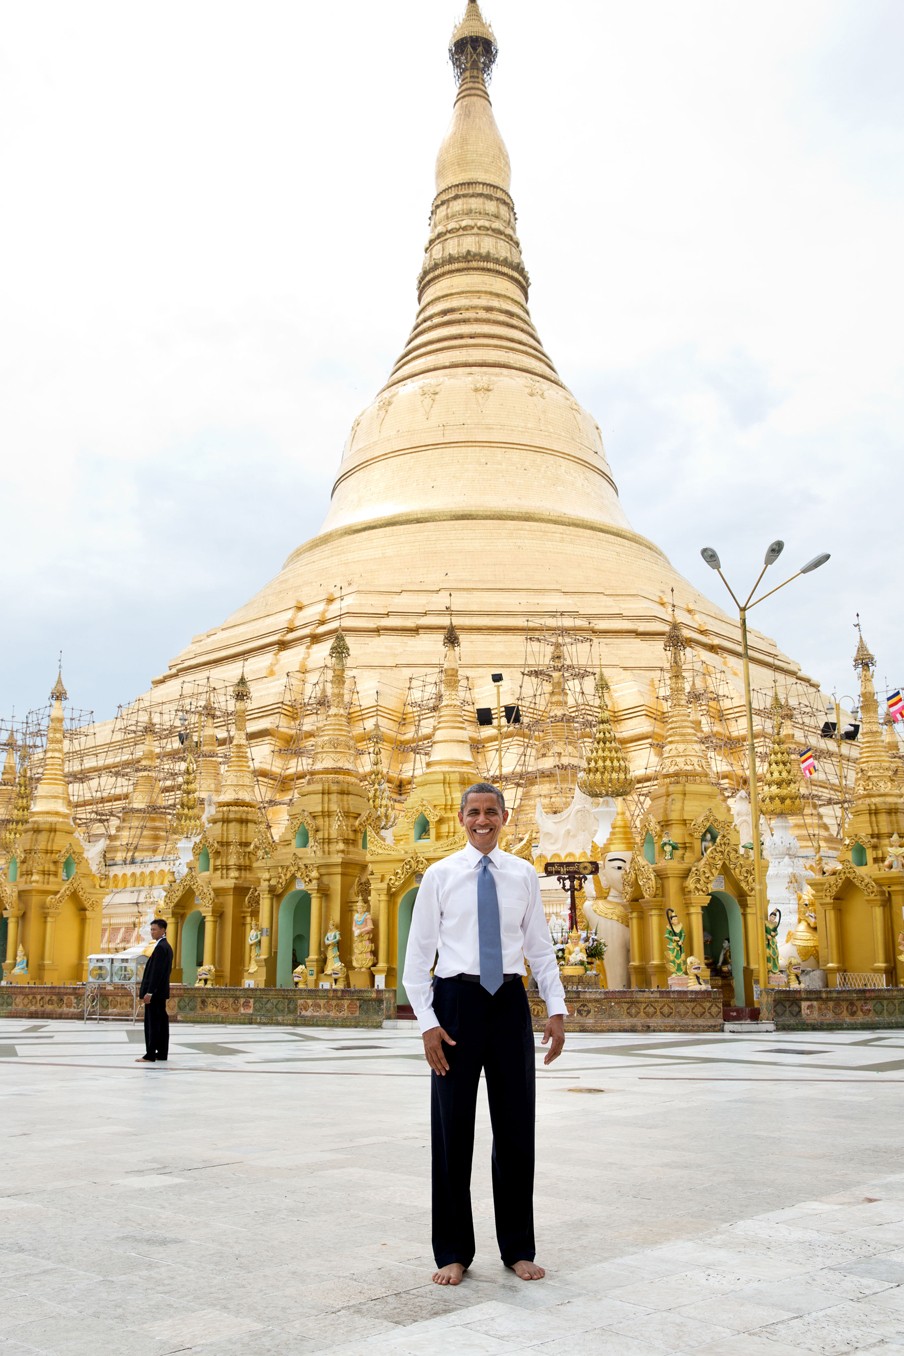 ‘President Barack Obama stands barefoot in front of the Shwedagon Pagoda in Rangoon, Burma, Nov. 19, 2012. All visitors must remove their shoes while touring the pagoda.’ Foto: Pete Souza/the White House